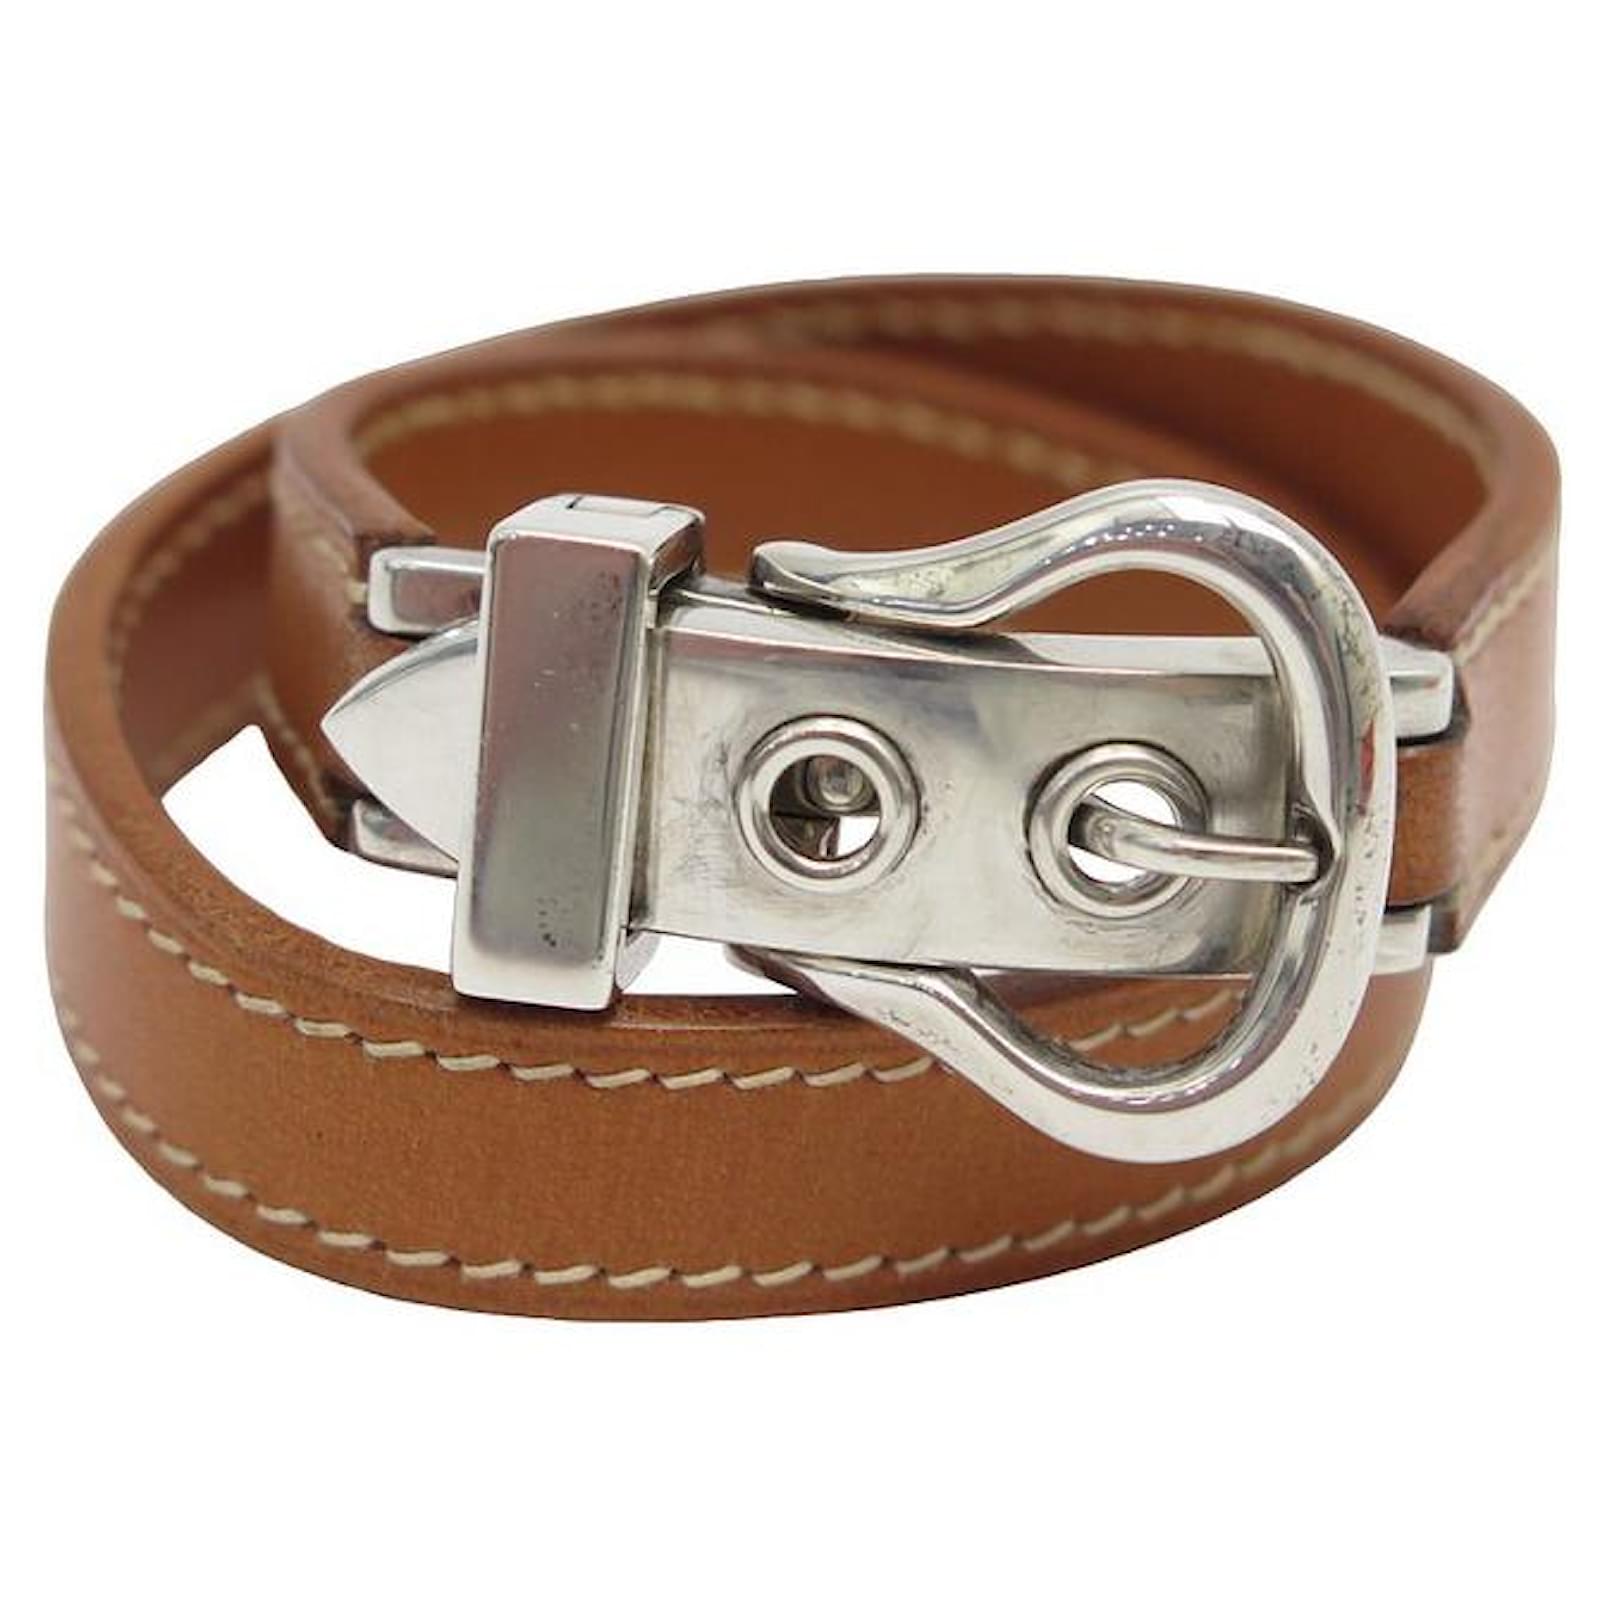 Hermès HERMES-ARMBAND MIT SELLIER-SCHNALLE IN SILBER 925